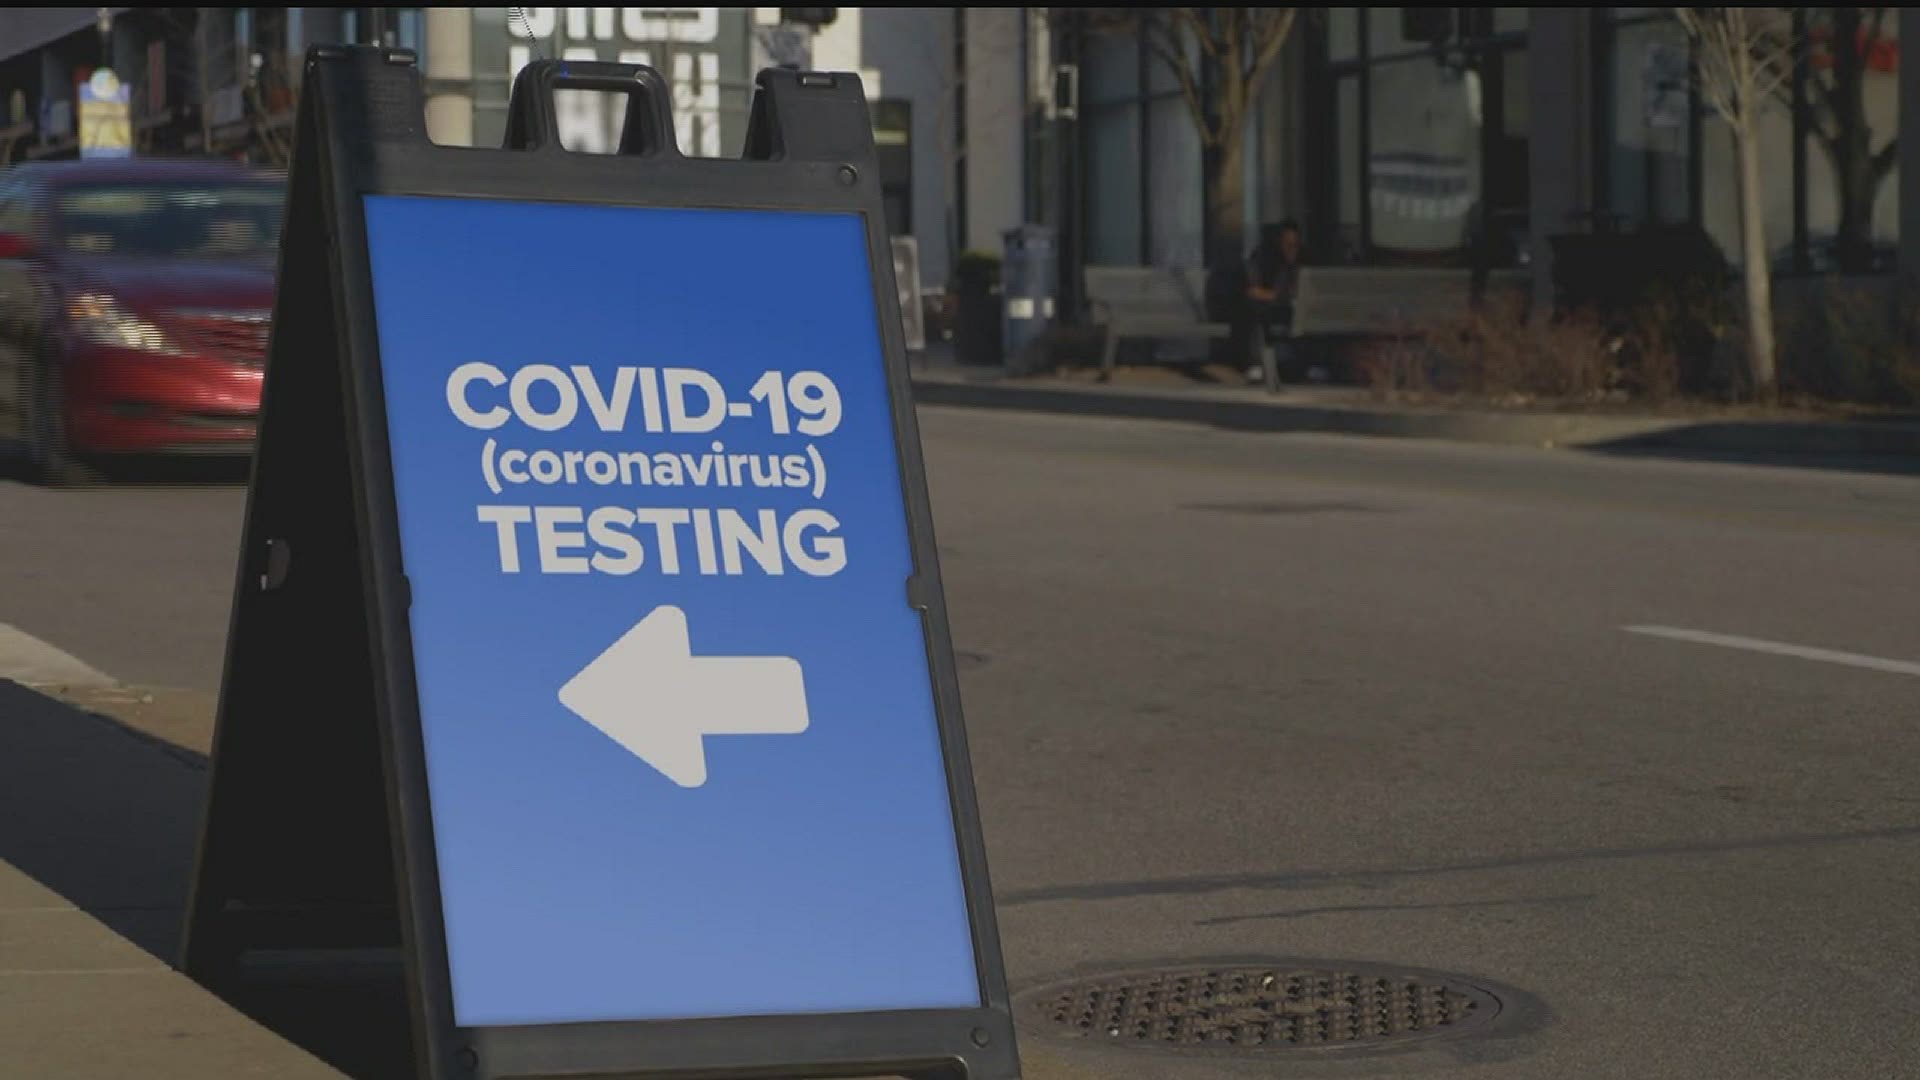 Doctors say understanding the coronavirus projections will help families better realize why it's important to take steps to mitigate the spread today.